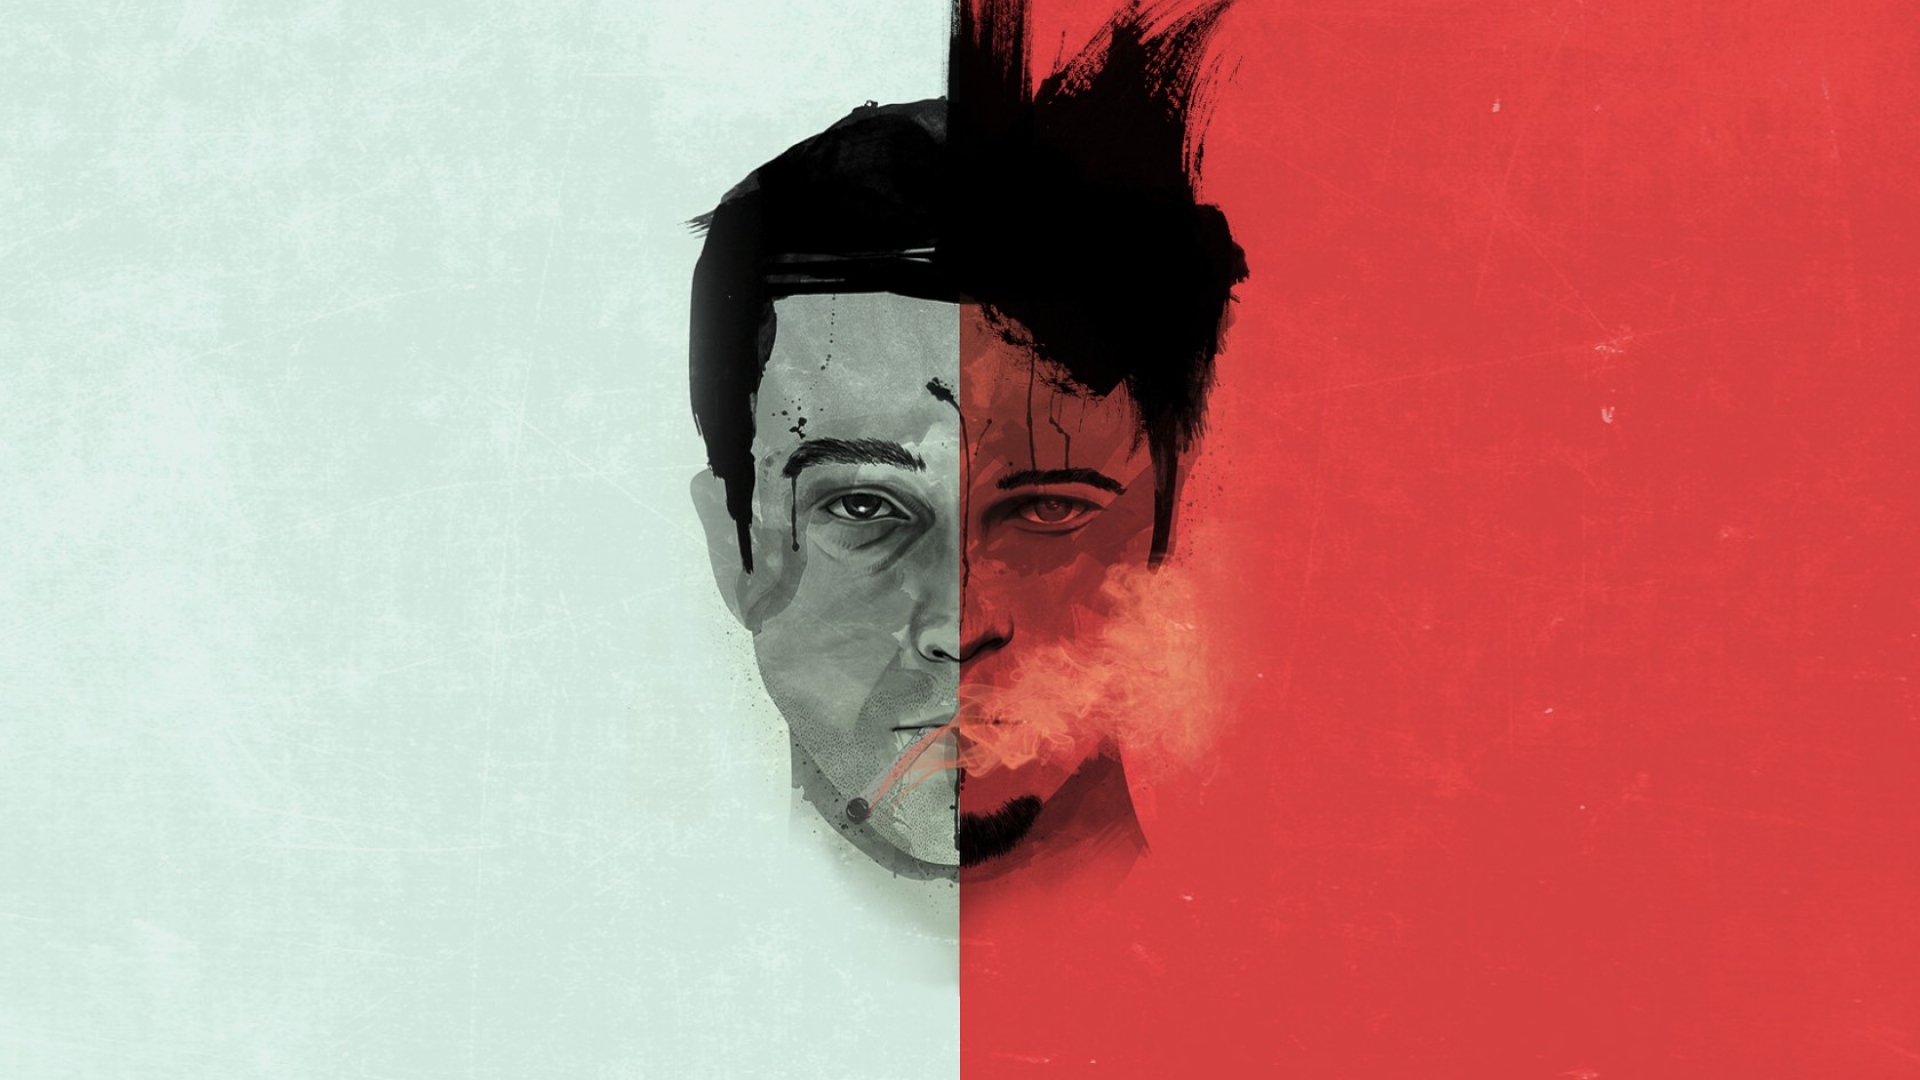 fight club wallpaper iphone,face,red,head,forehead,portrait